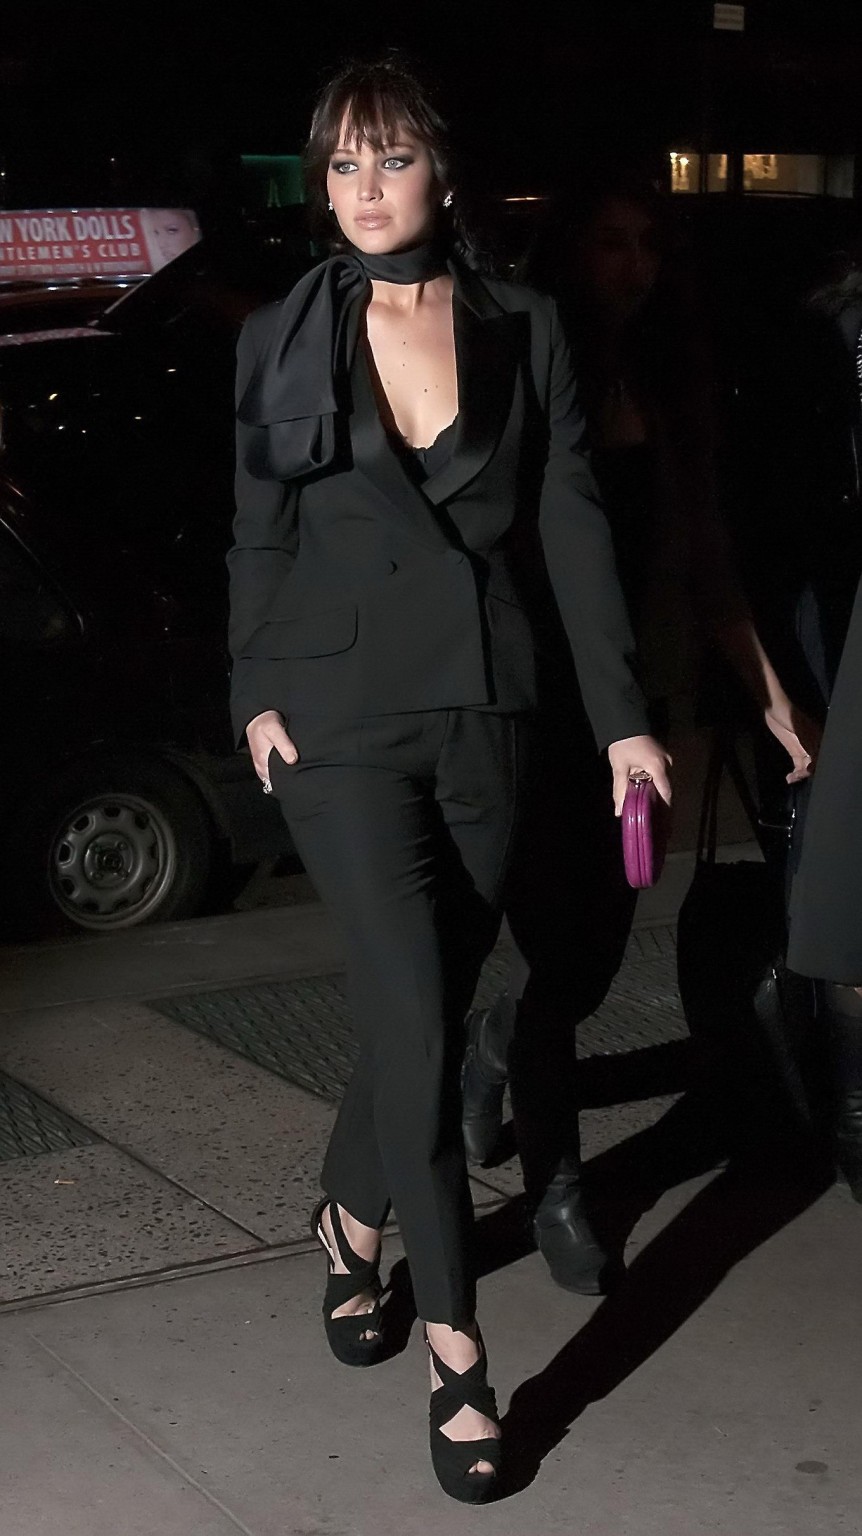 Jennifer lawrence bh spitze bei 'the silver linings playbook' premiere in nyc
 #75248492